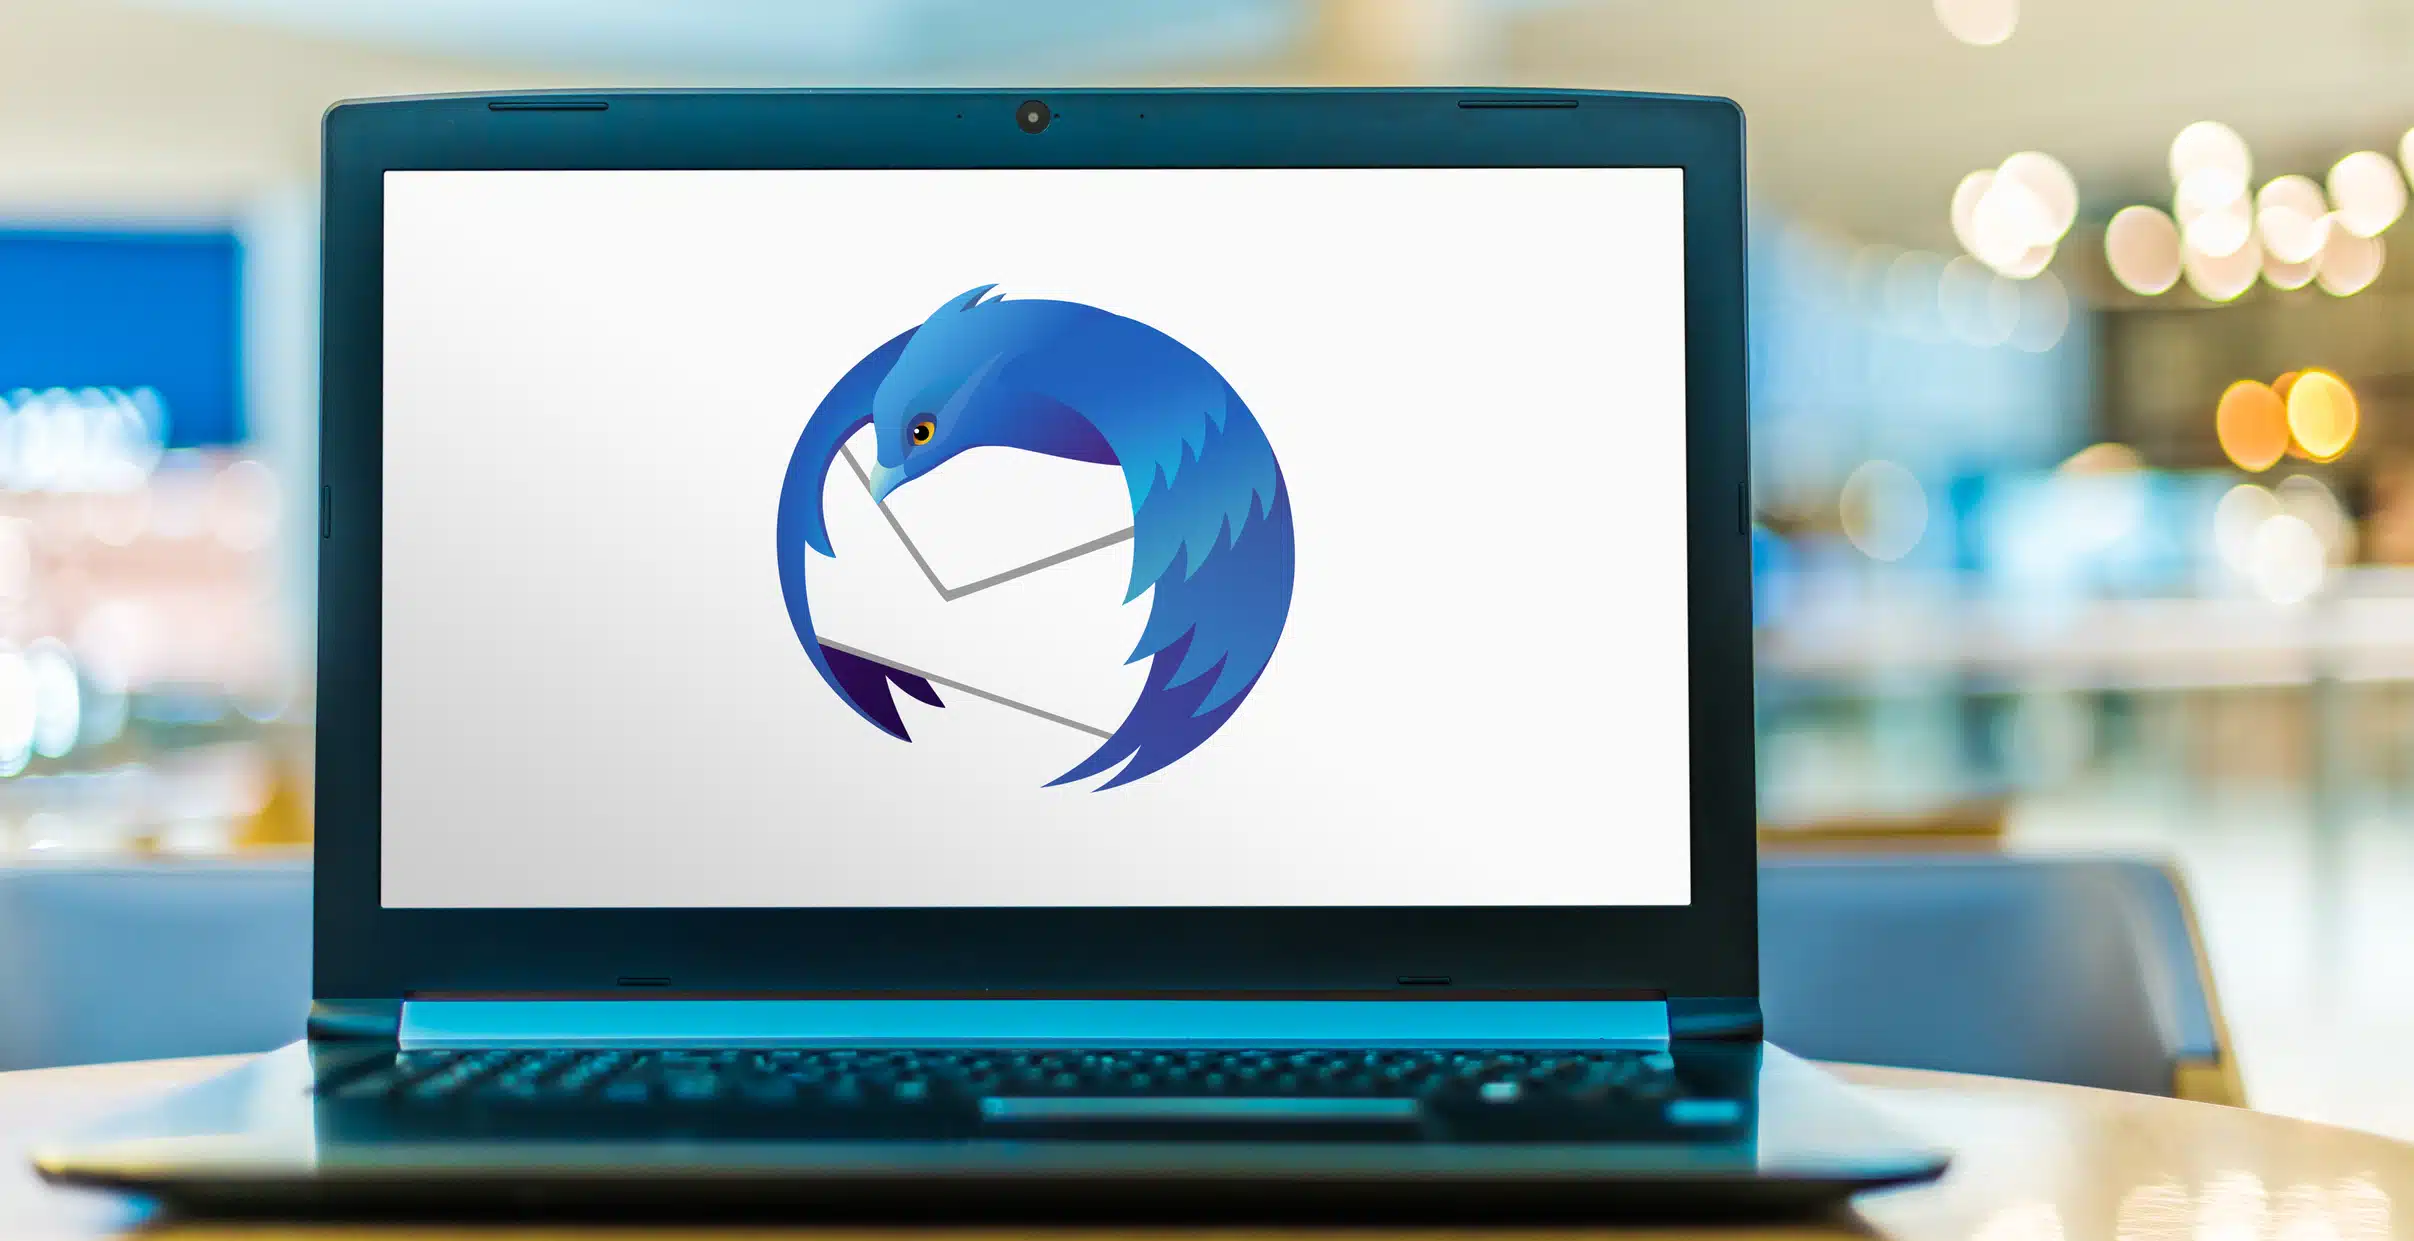 Download the latest version of the free email tool Thunderbird 128 ‘Nebula’ now available!